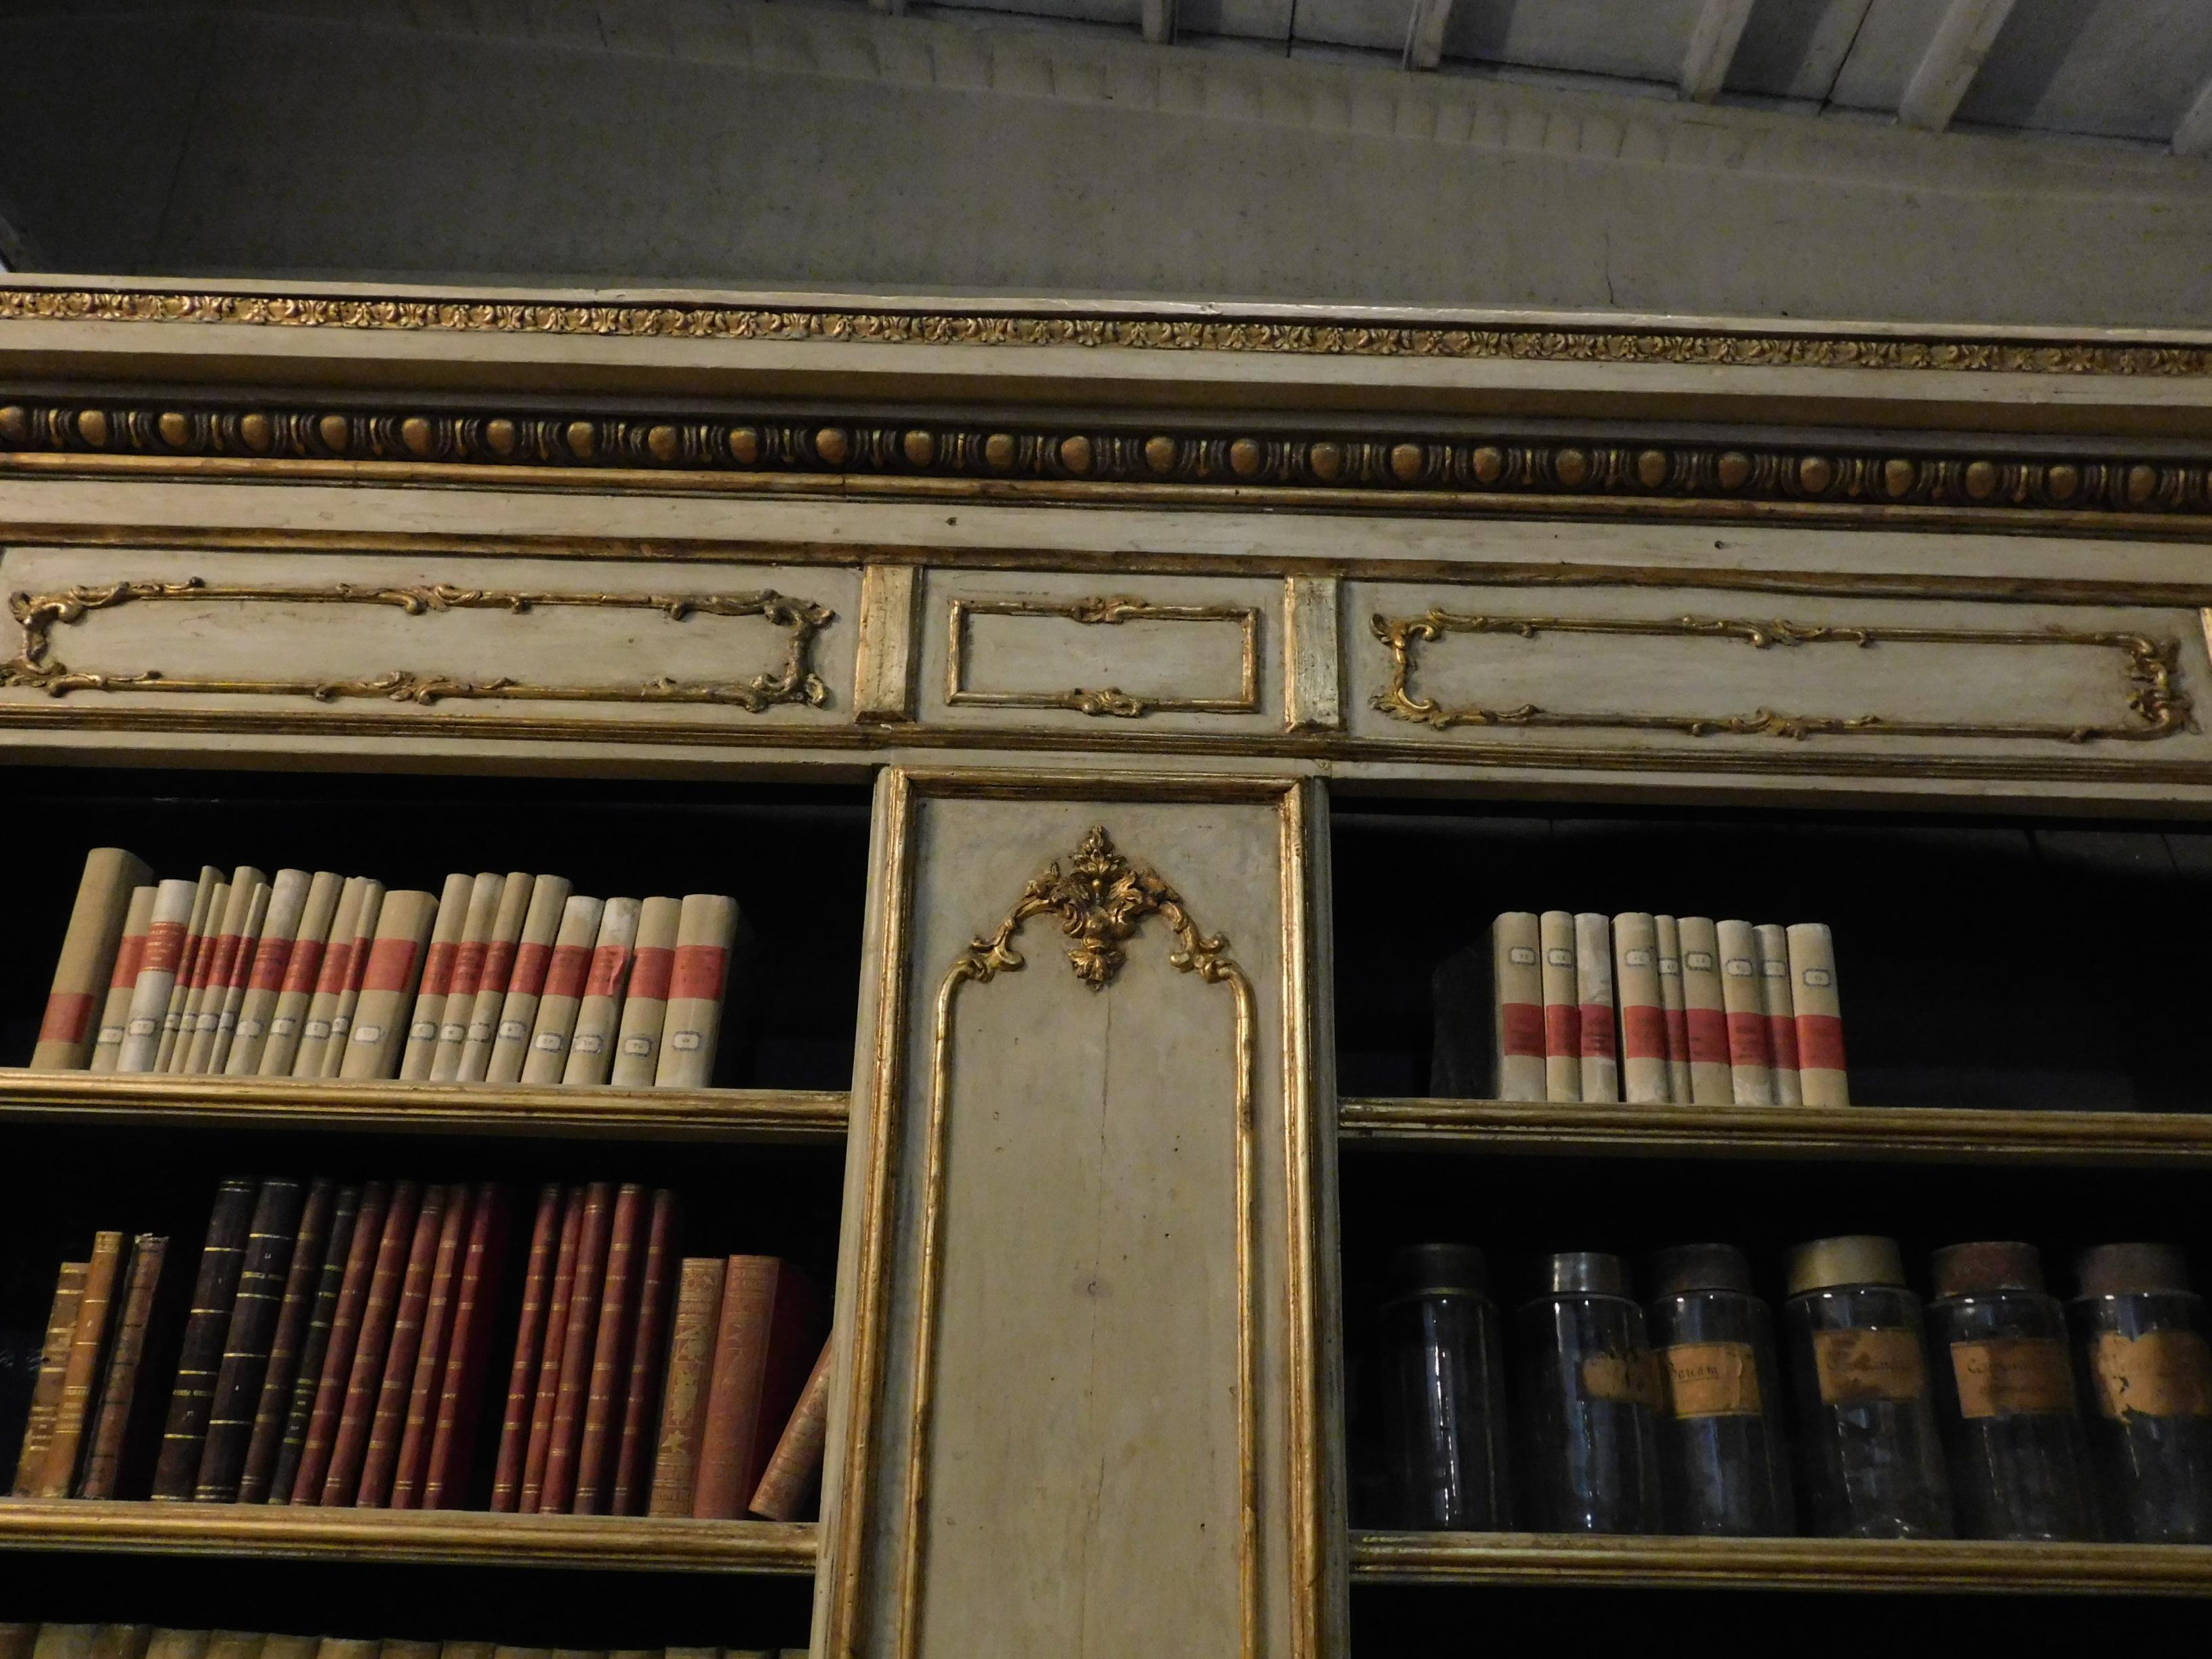 Wood Antique Lacquered Gilded Bookcase, Carved Columns & Friezes, 19th Century Italy For Sale